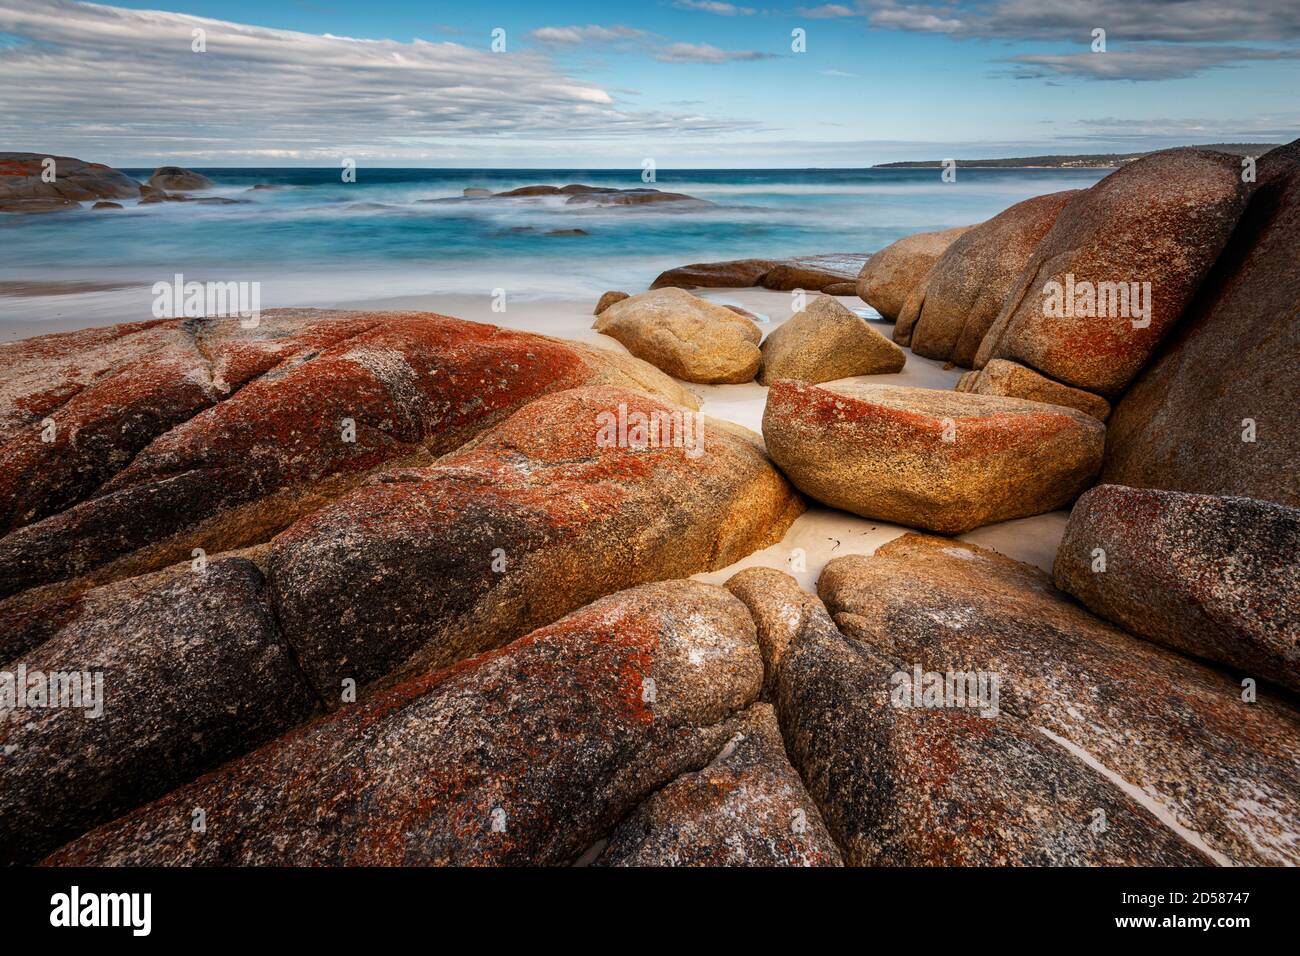 Beautiful view of boulders and beach at Bay of Fires. Stock Photo